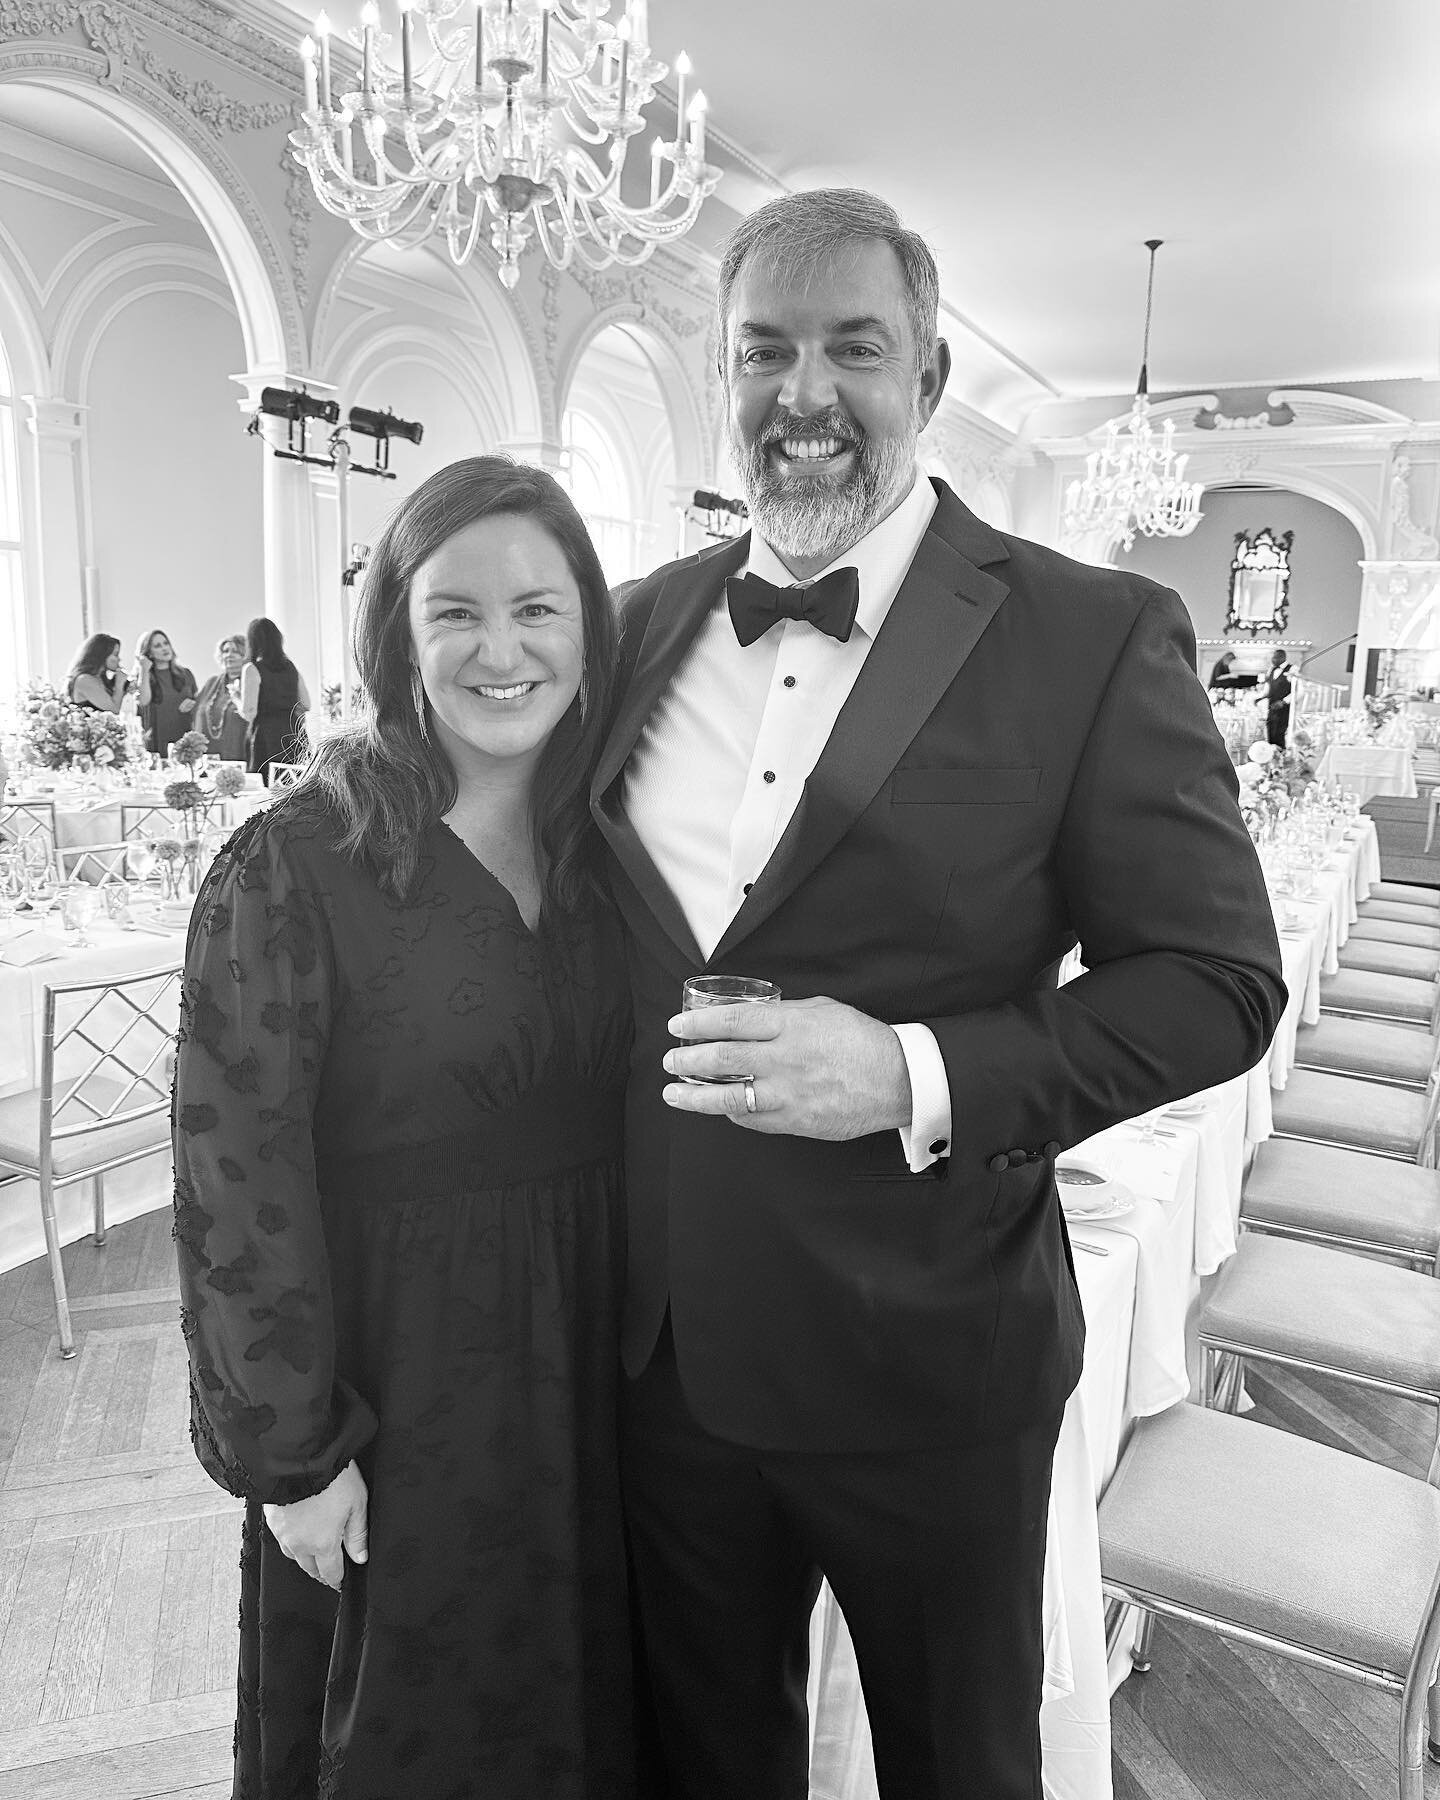 @age_moore and me in our typical weekend attire. 

A fantastic evening at the annual Philip Trammell Shutze awards last night, celebrating the incredible talent represented there.  A special thanks and congratulations to our friends and hosts at @ste